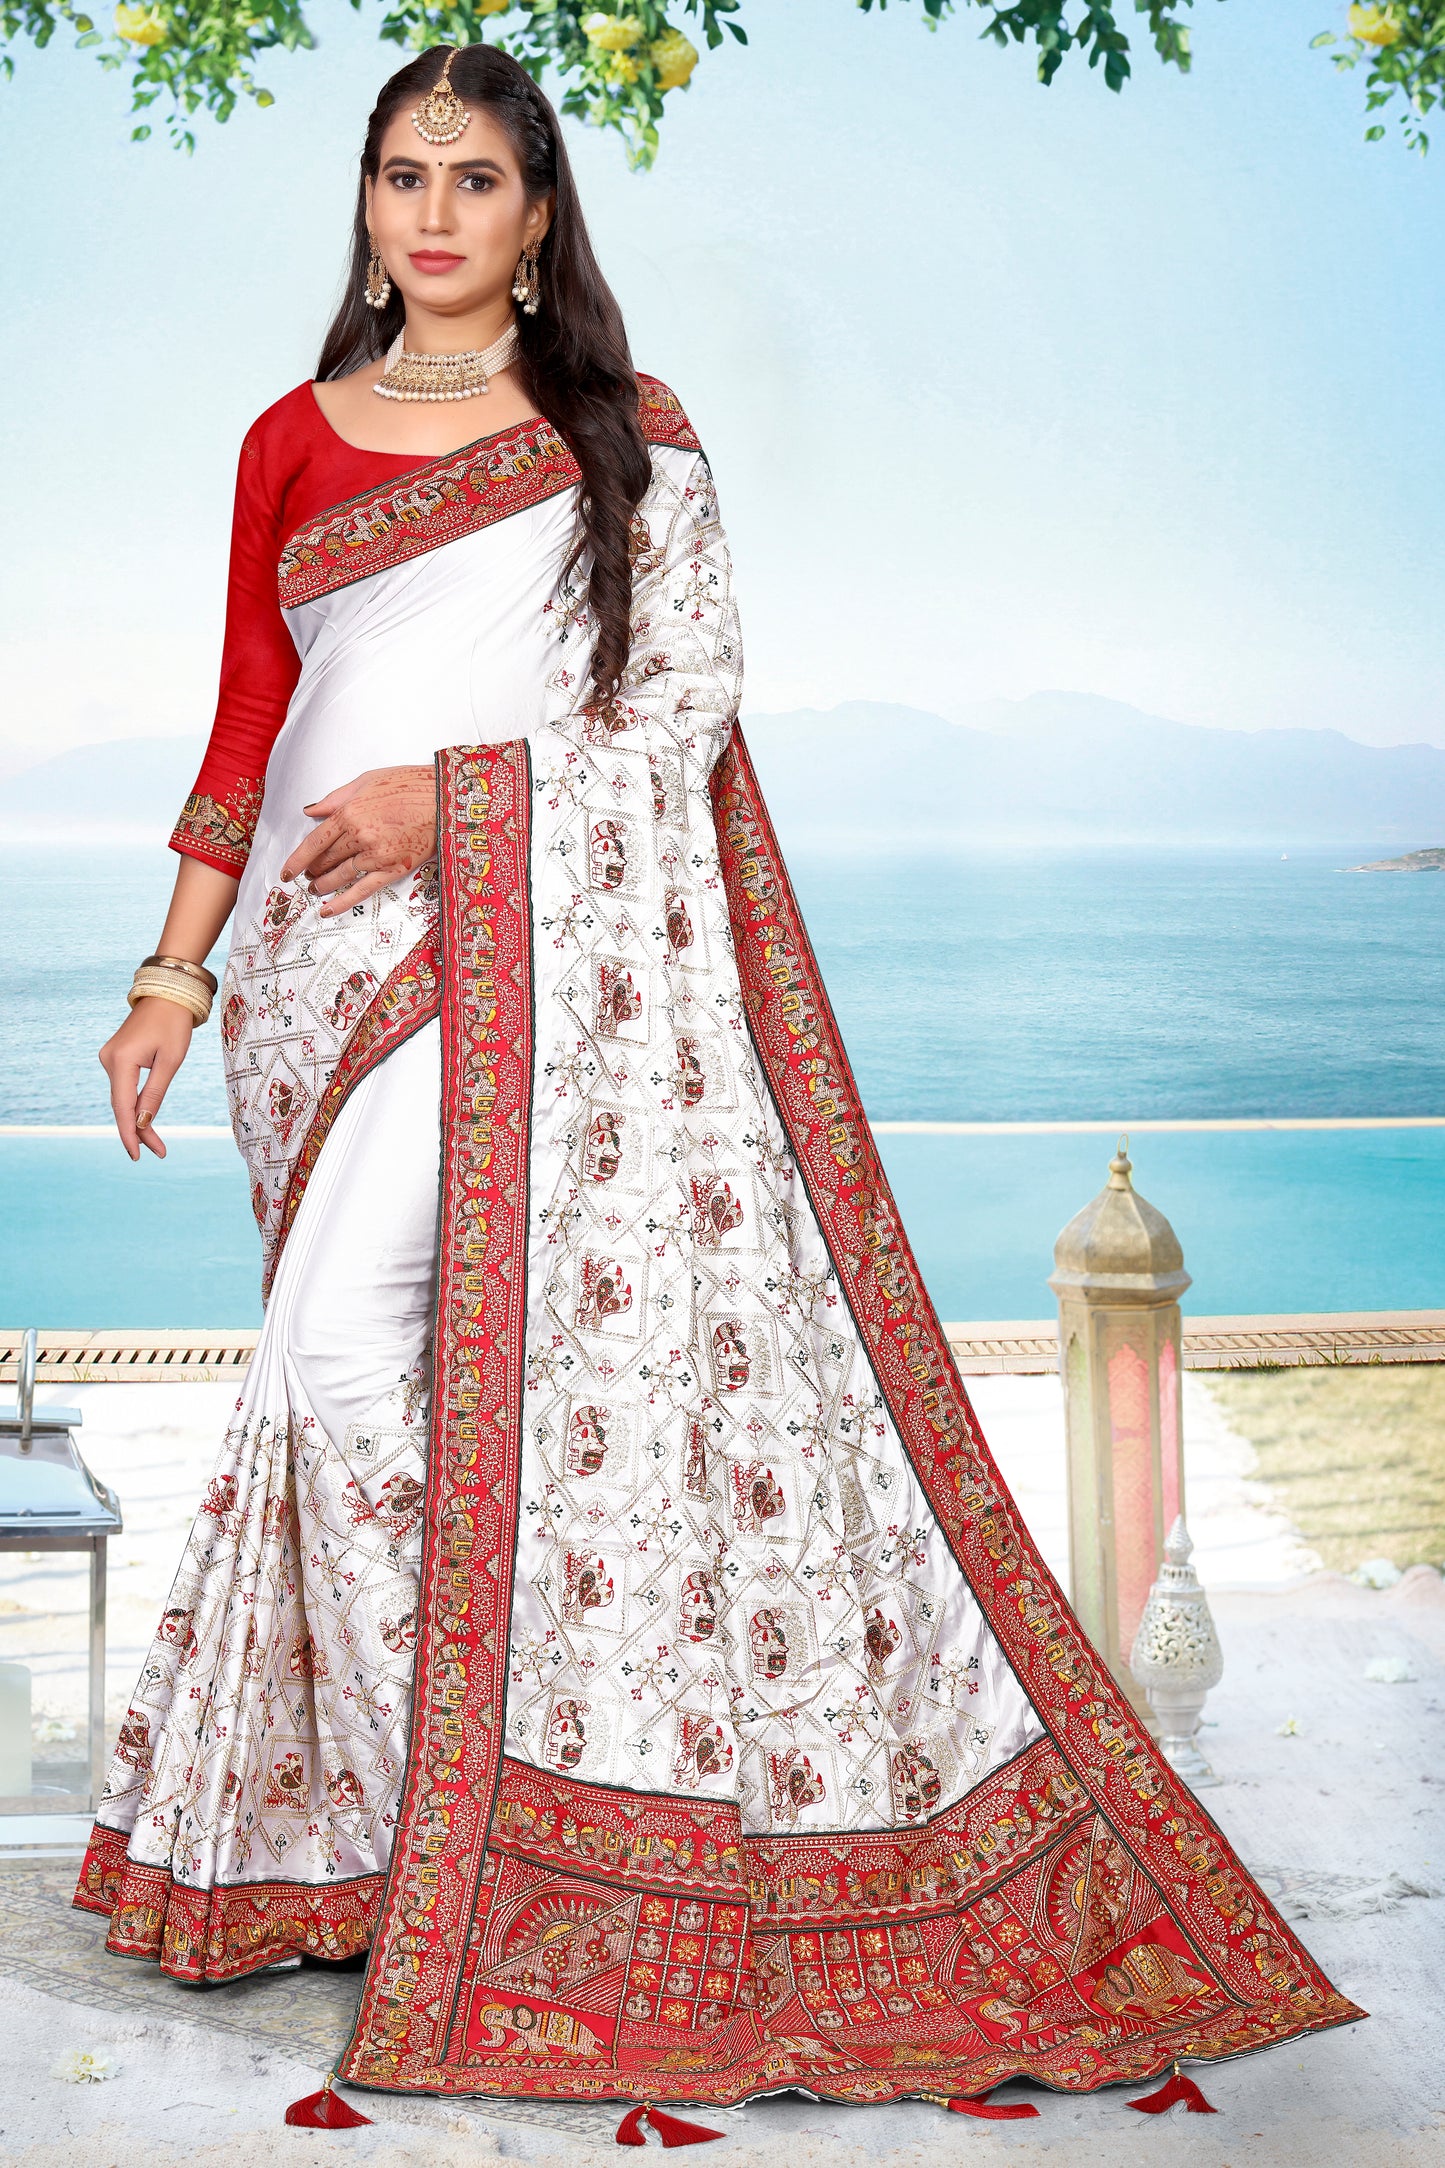 HEAVY TRADITIONAL ROYAL WHITE WITH BORDER IN RED, GHARCHOLA MADE OF GAJI SILK FOR WEDDING IN 5 MORE WEDDING COLORS FOR ALL FUNCTIONS.